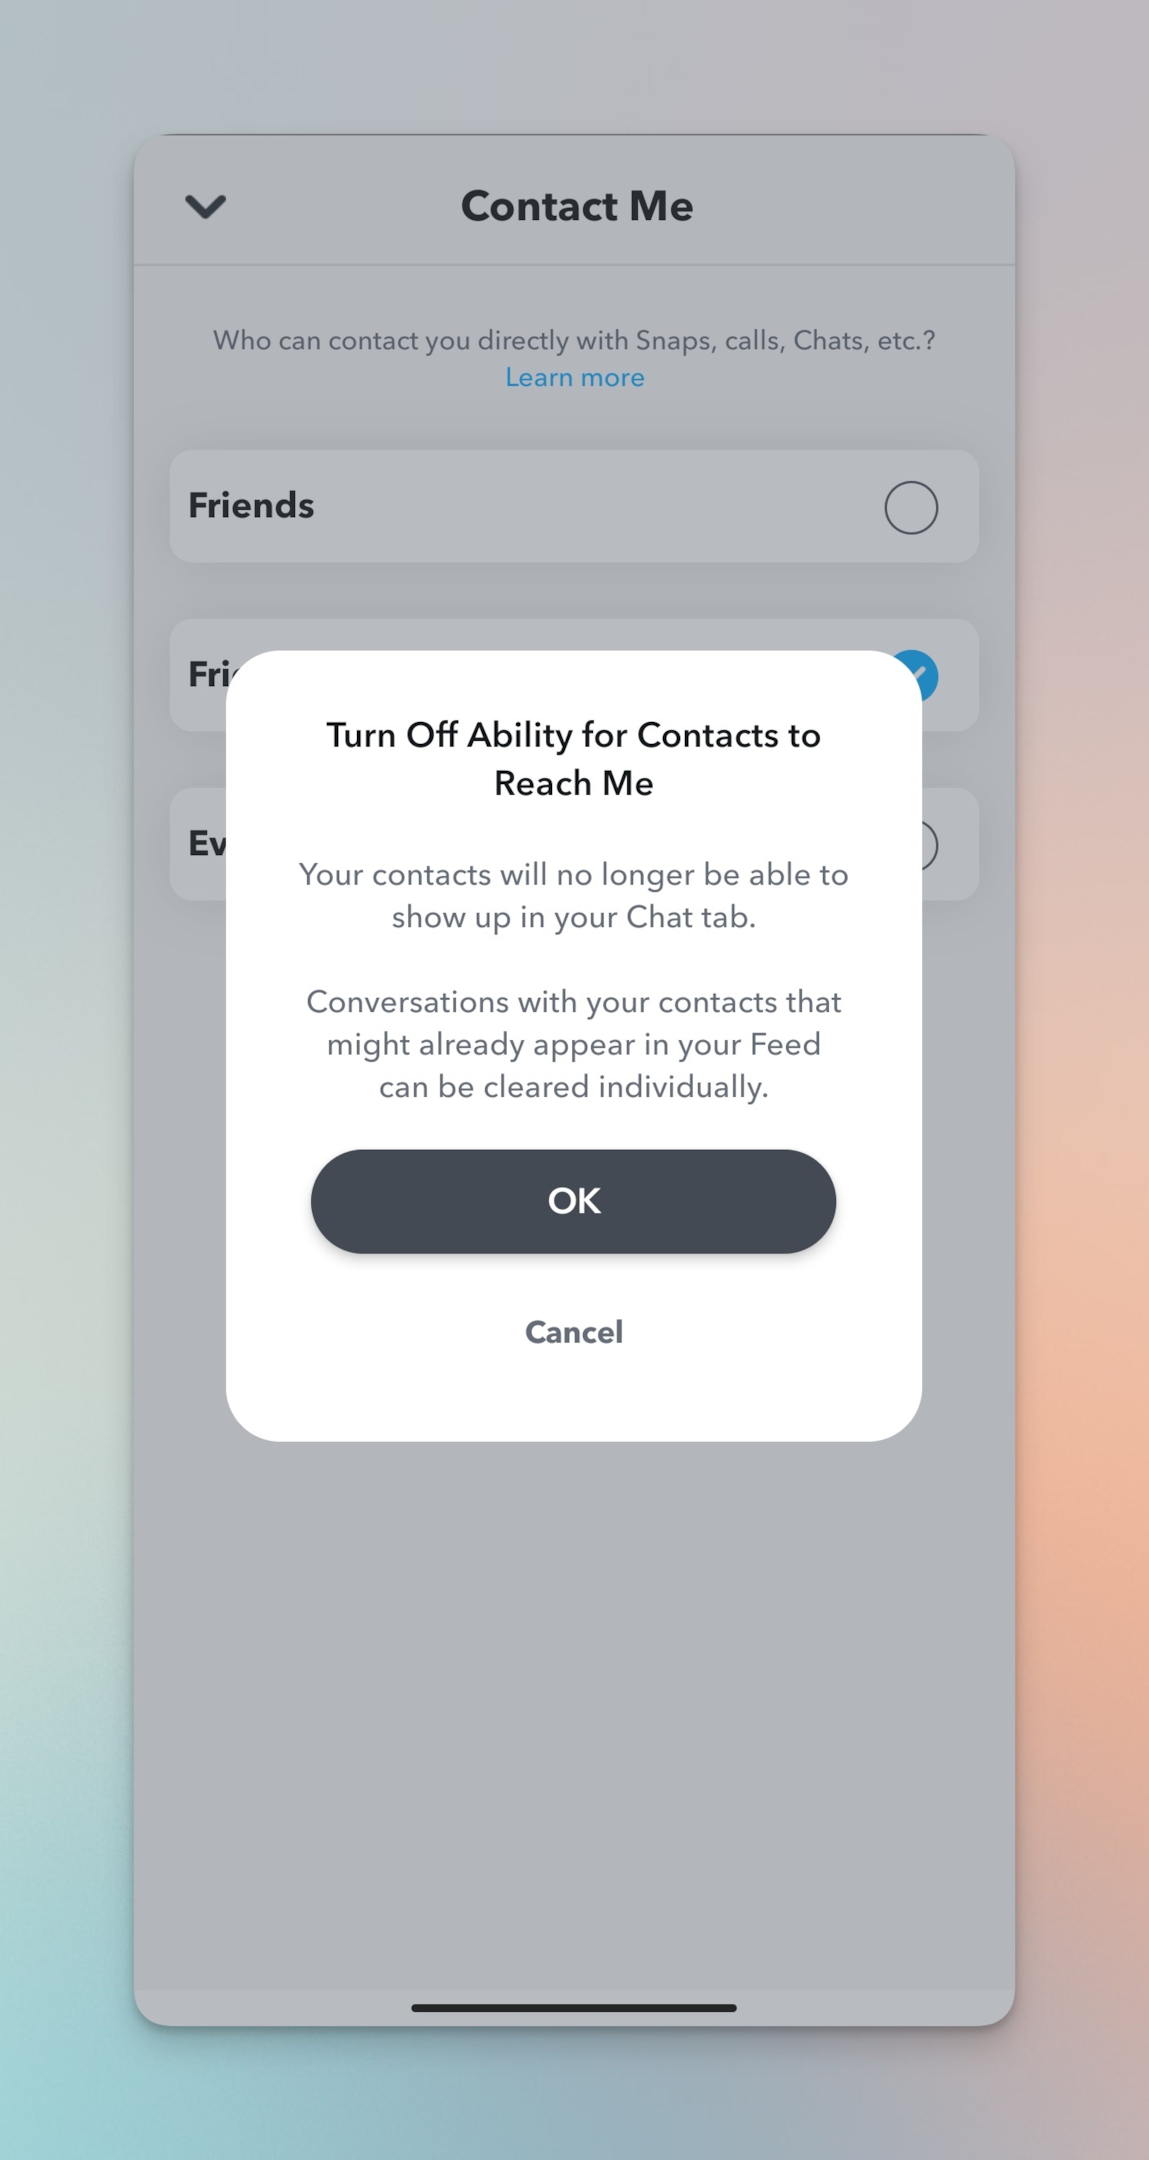 Remote.tools shows privacy settings for your Snapchat account. After deleting contact number of friends, they will not be able to contact you, even search for your account.